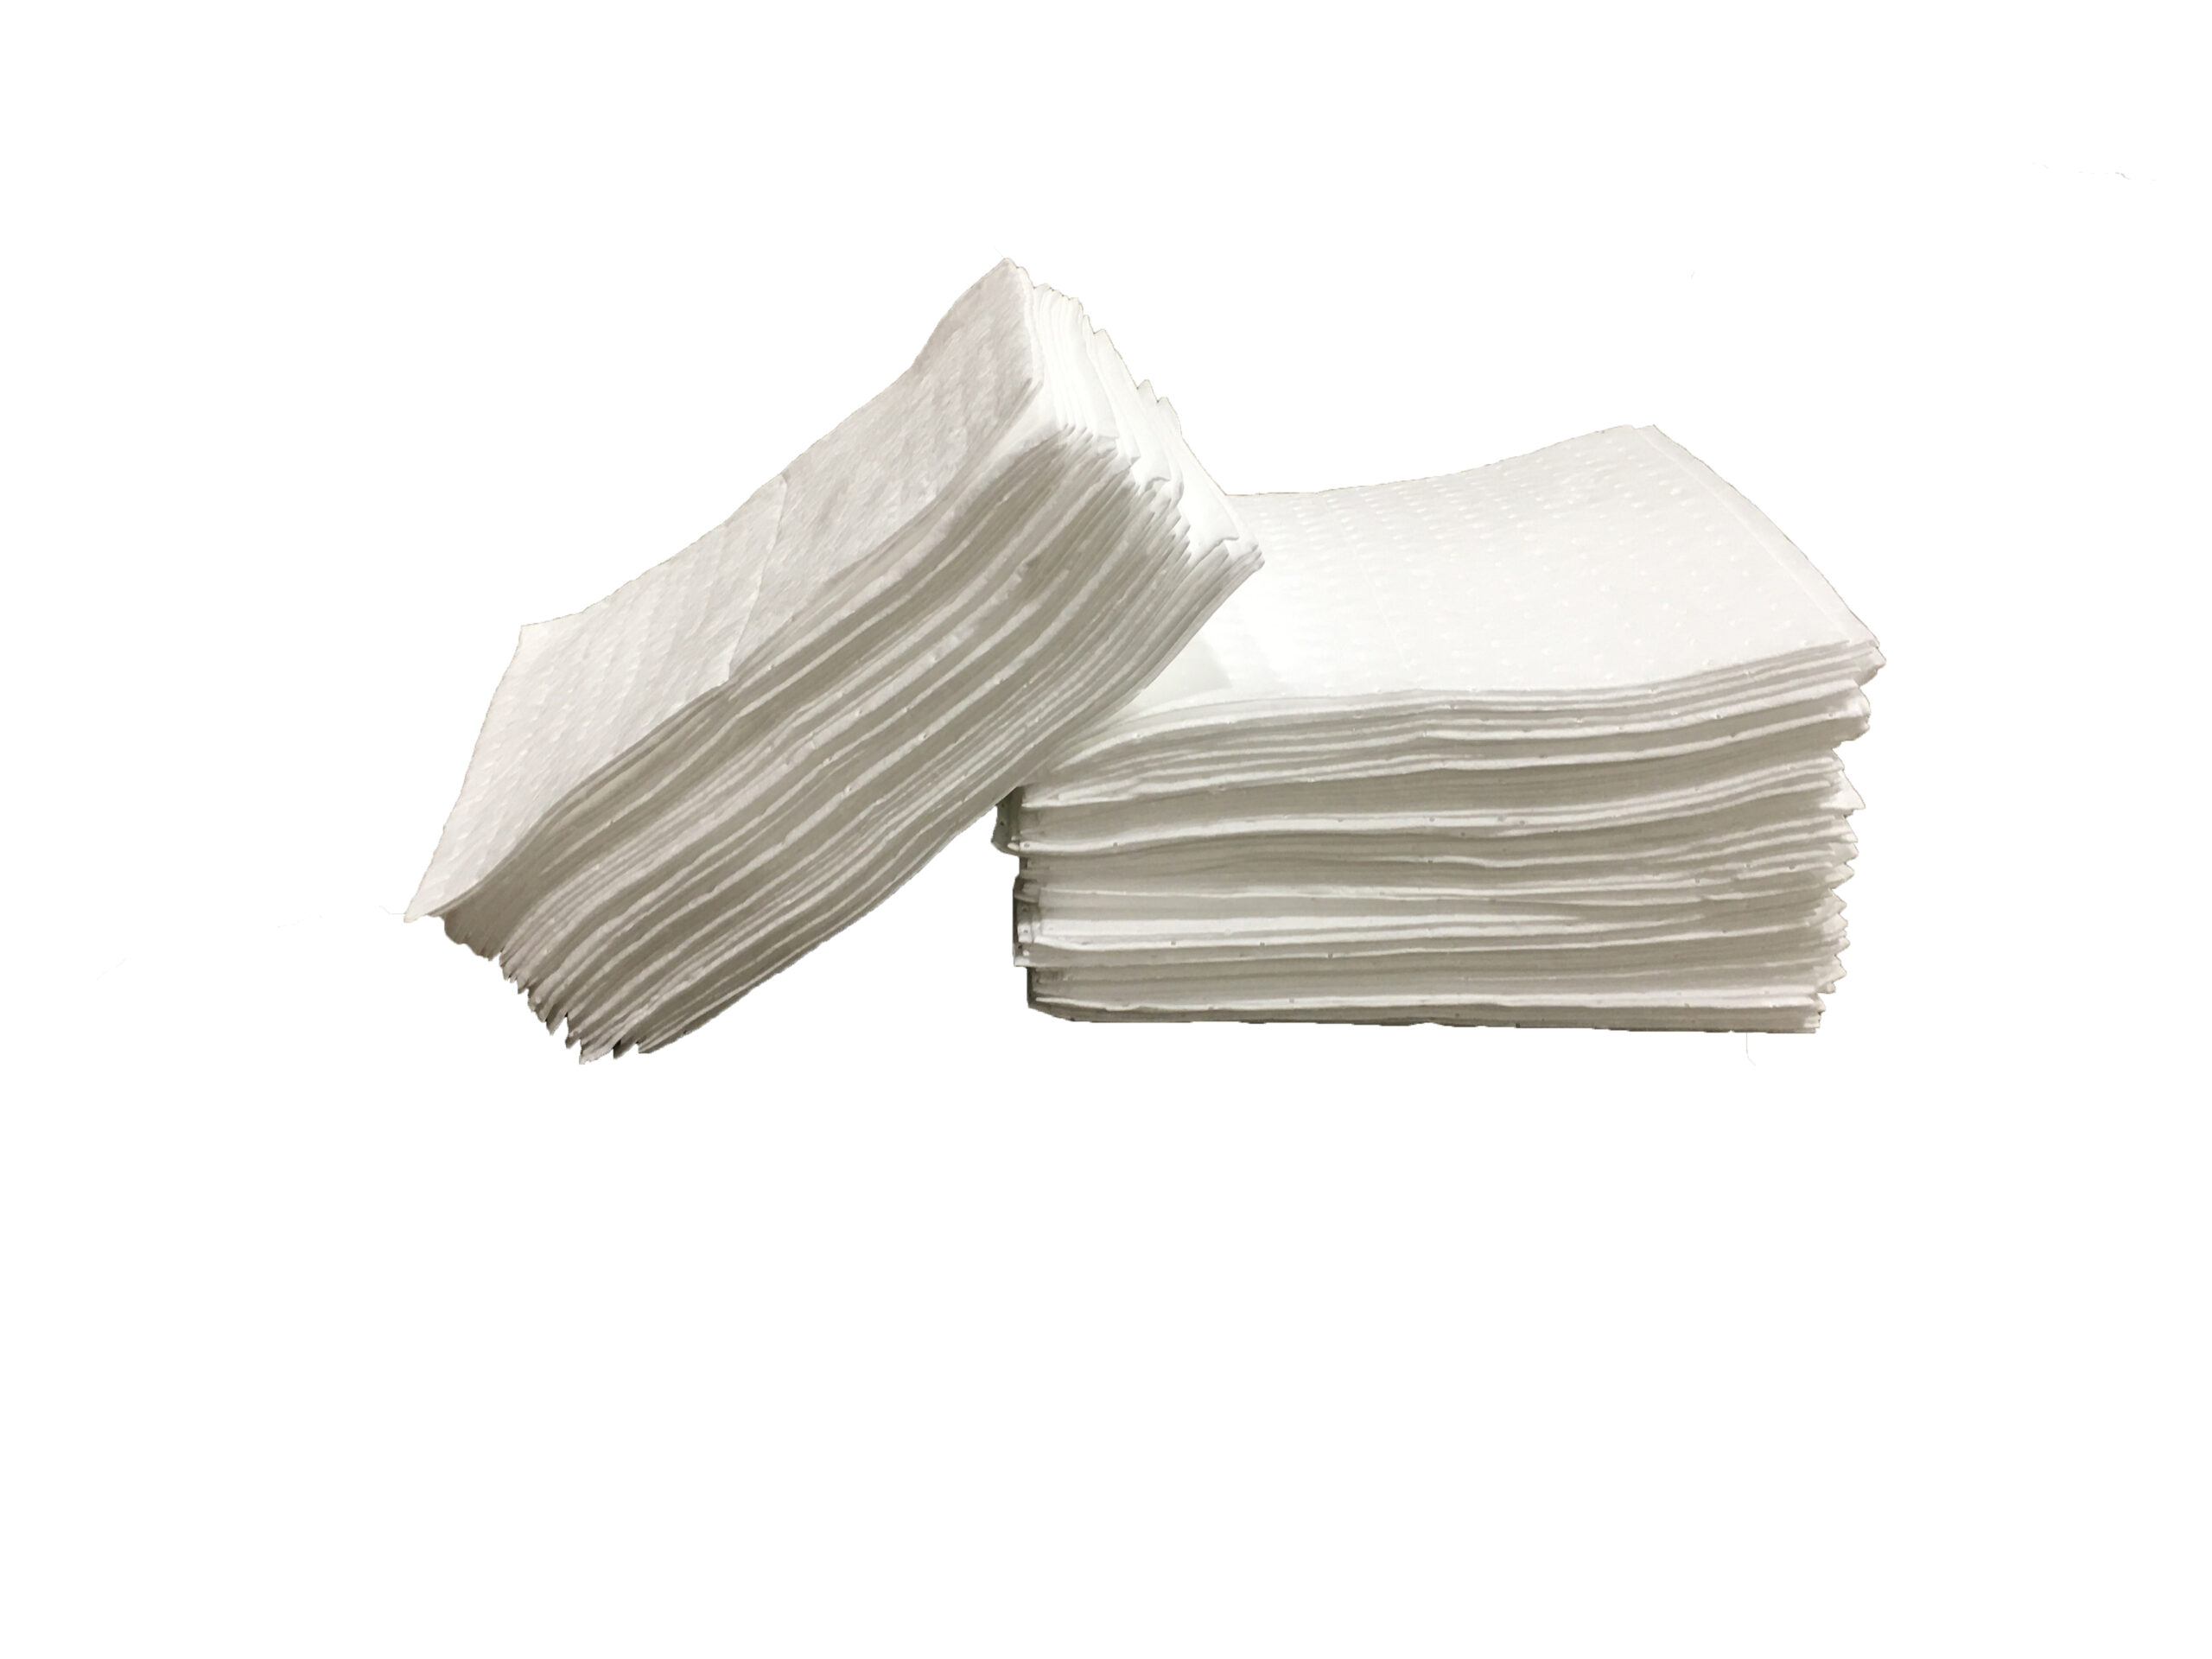 Oil-only absorbent pads for oil-based spills, 15 X 18 inches, 100  pads/package.